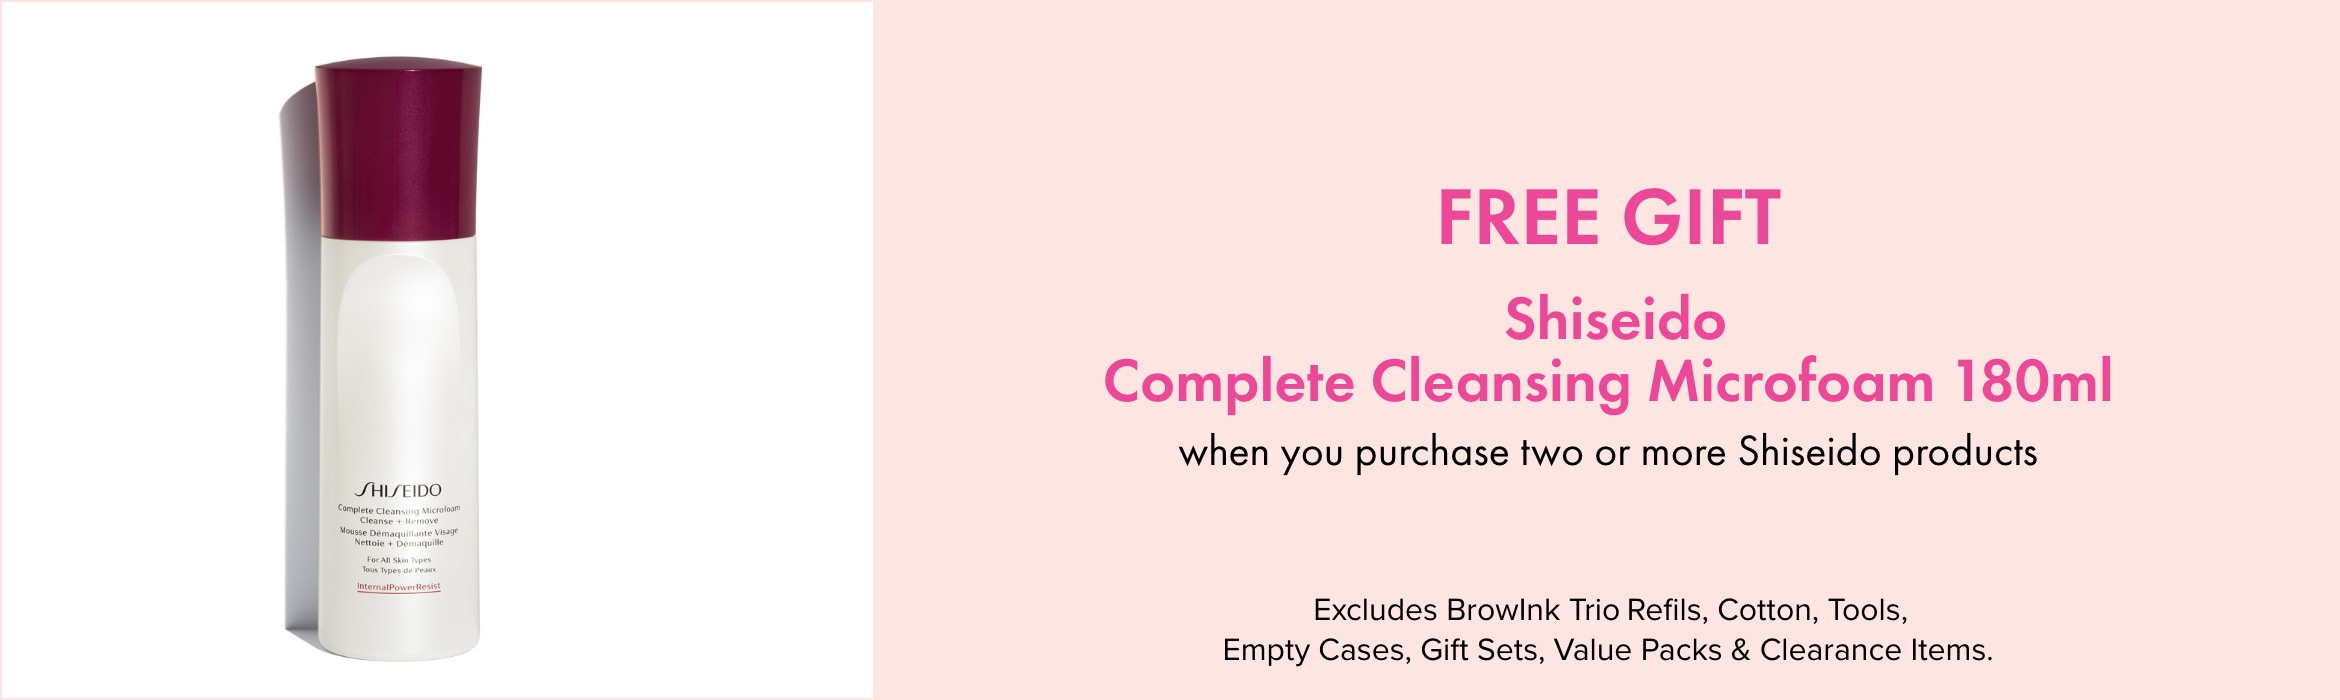  FREE GIFT Shiseido Complete Cleansing Microfoam 180ml when you purchase two or more Shiseido Products